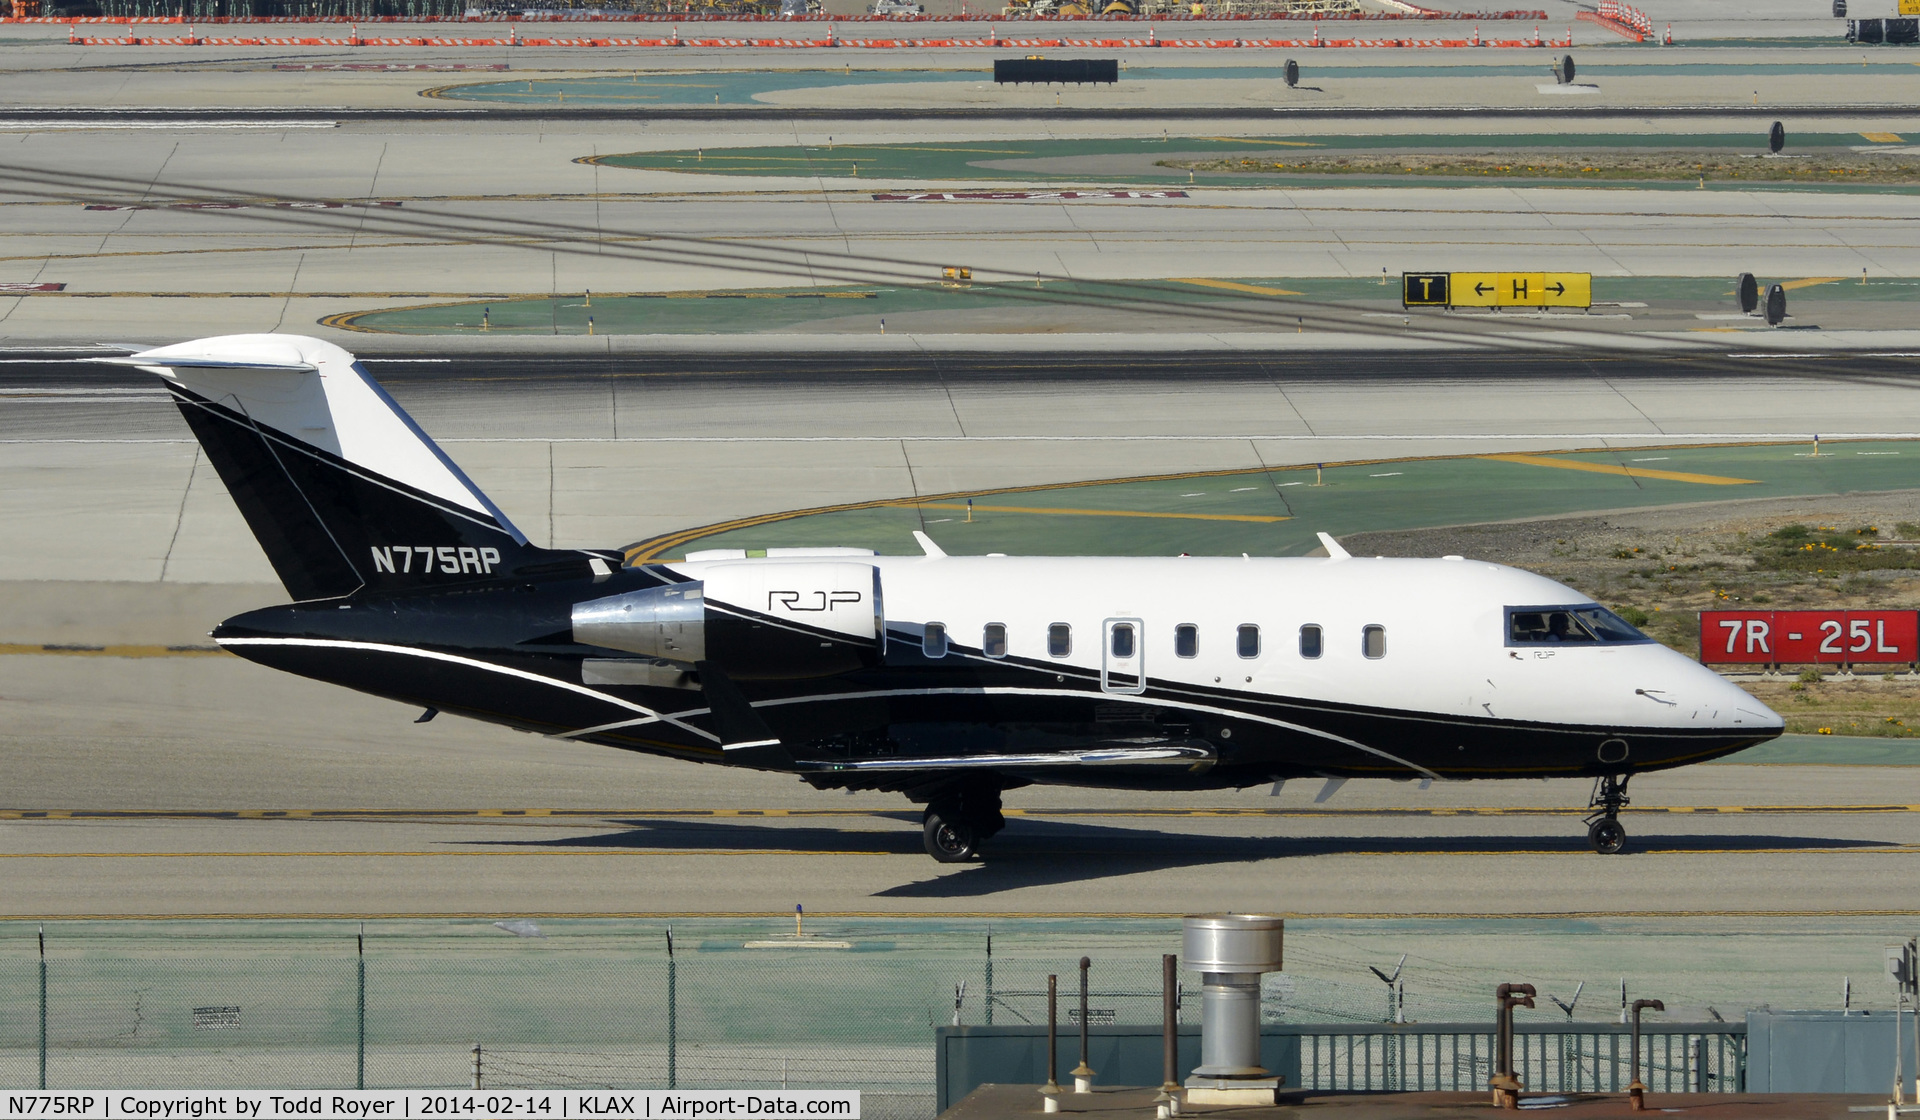 N775RP, 2009 Bombardier Challenger 605 (CL-600-2B16) C/N 5821, Taxiing to parking at LAX